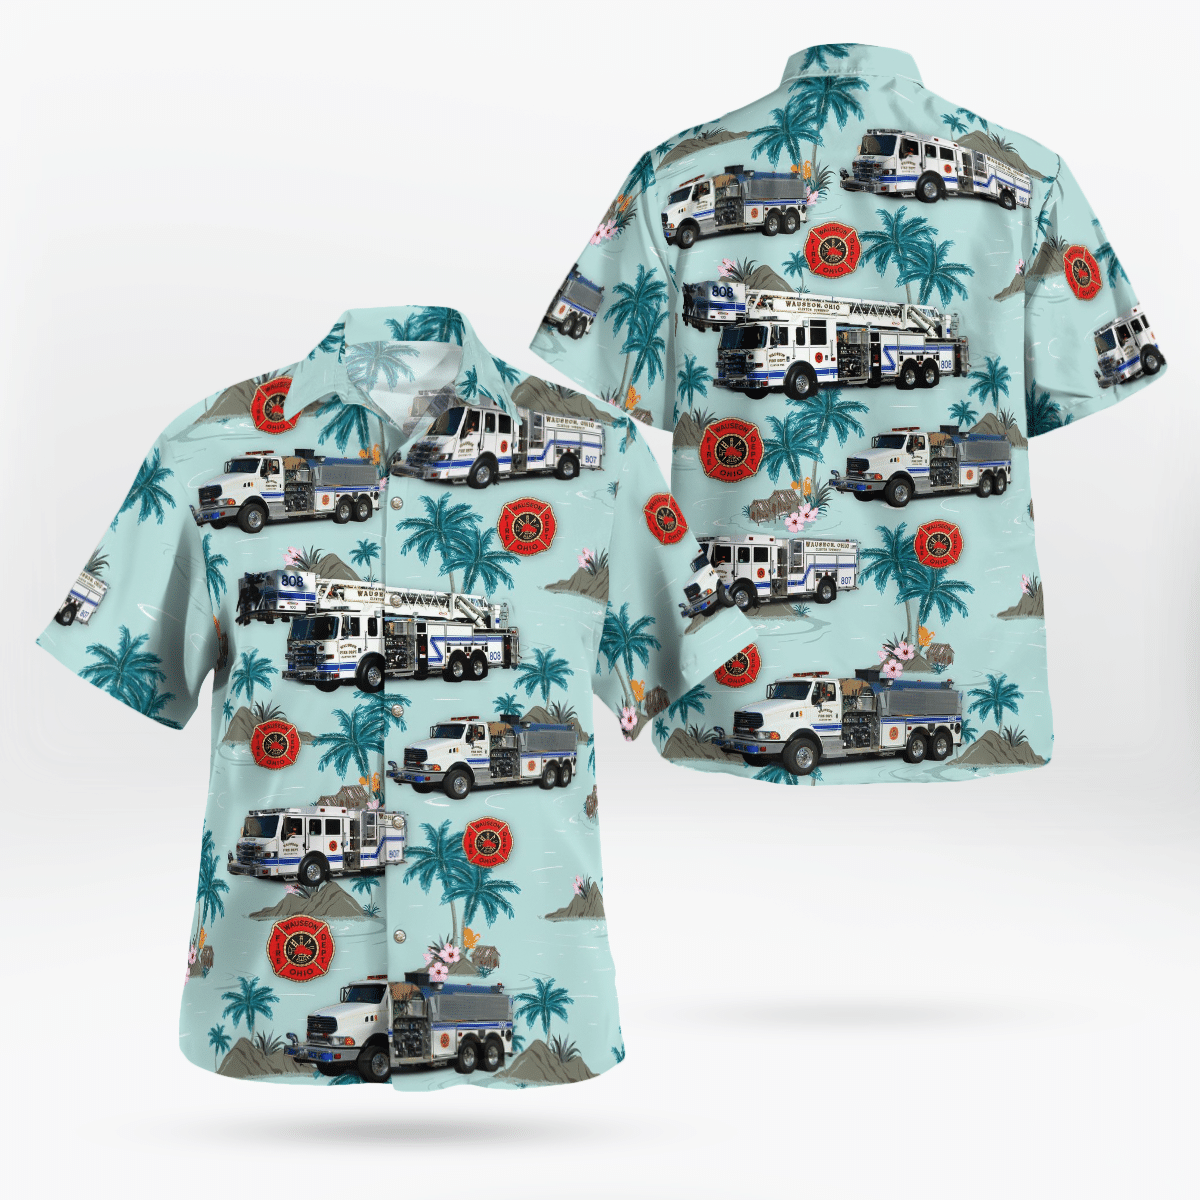 This post will help you find the perfect Hawaiian Shirt for your need 201